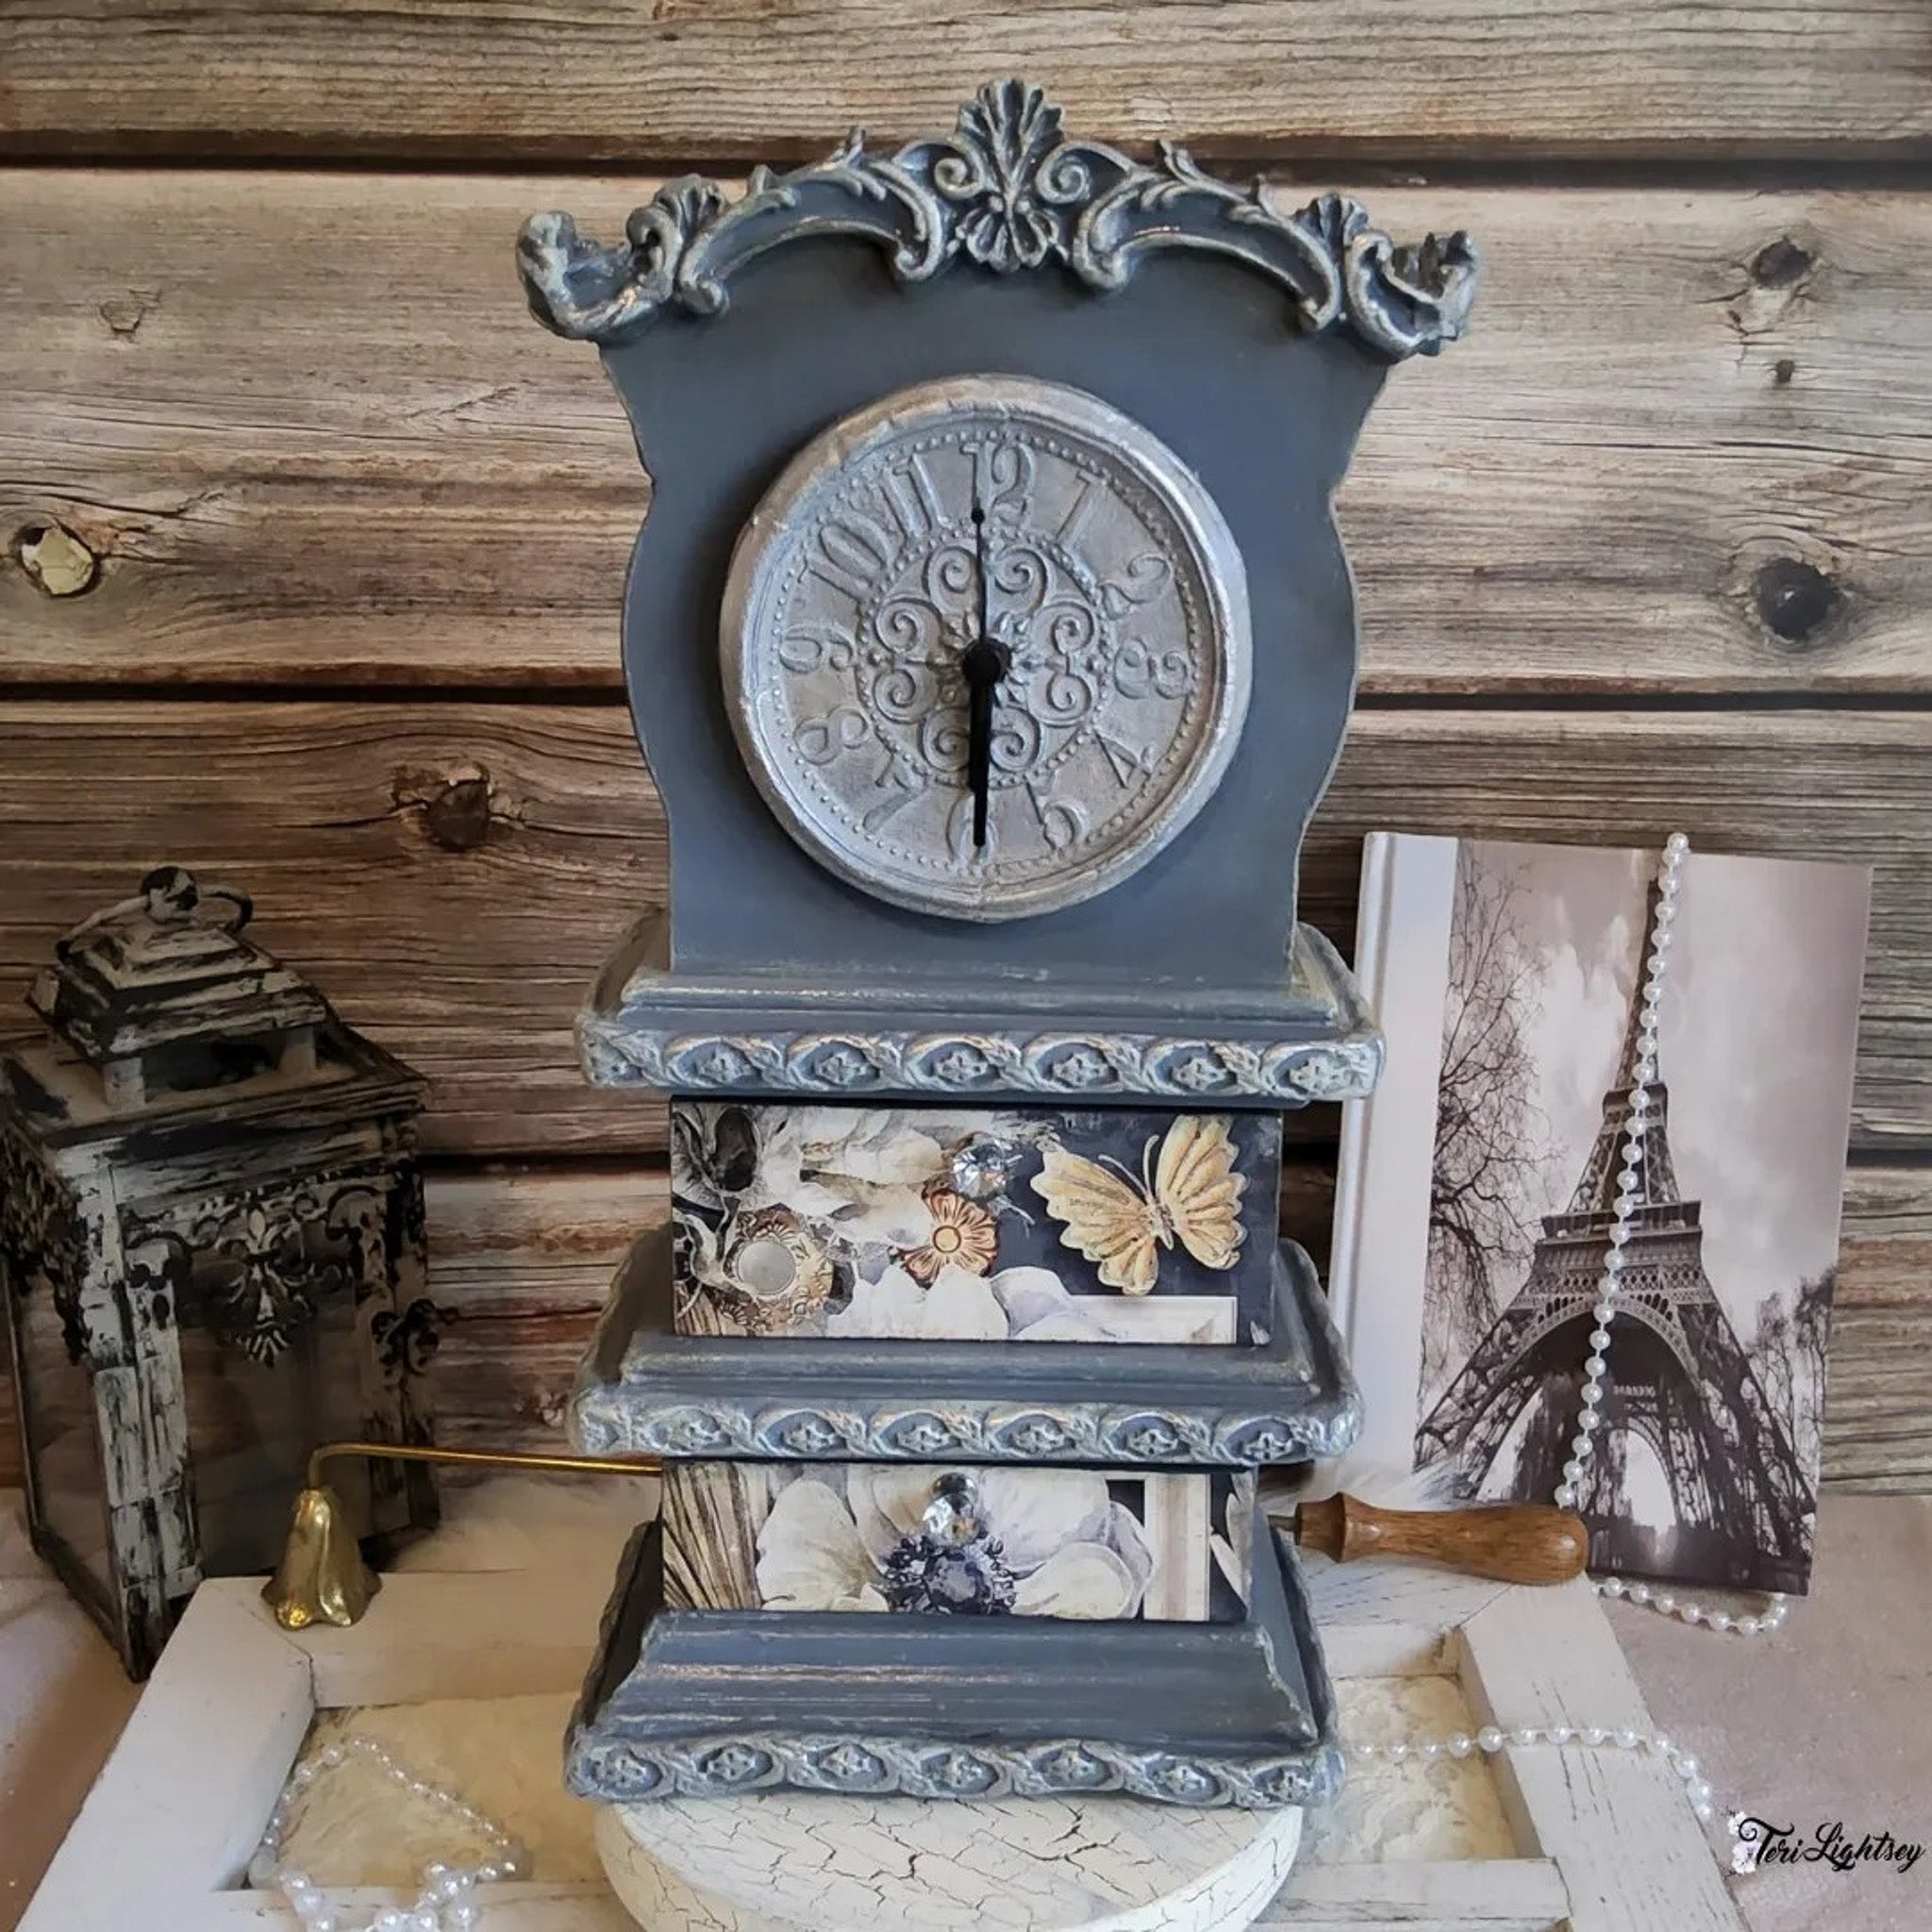 A vintage table clock with 2 drawers refurbished by Teri Lightsey is painted a muted blue and features Decoupage Queen's Sugar Magnolia A4 rice paper on the drawers.